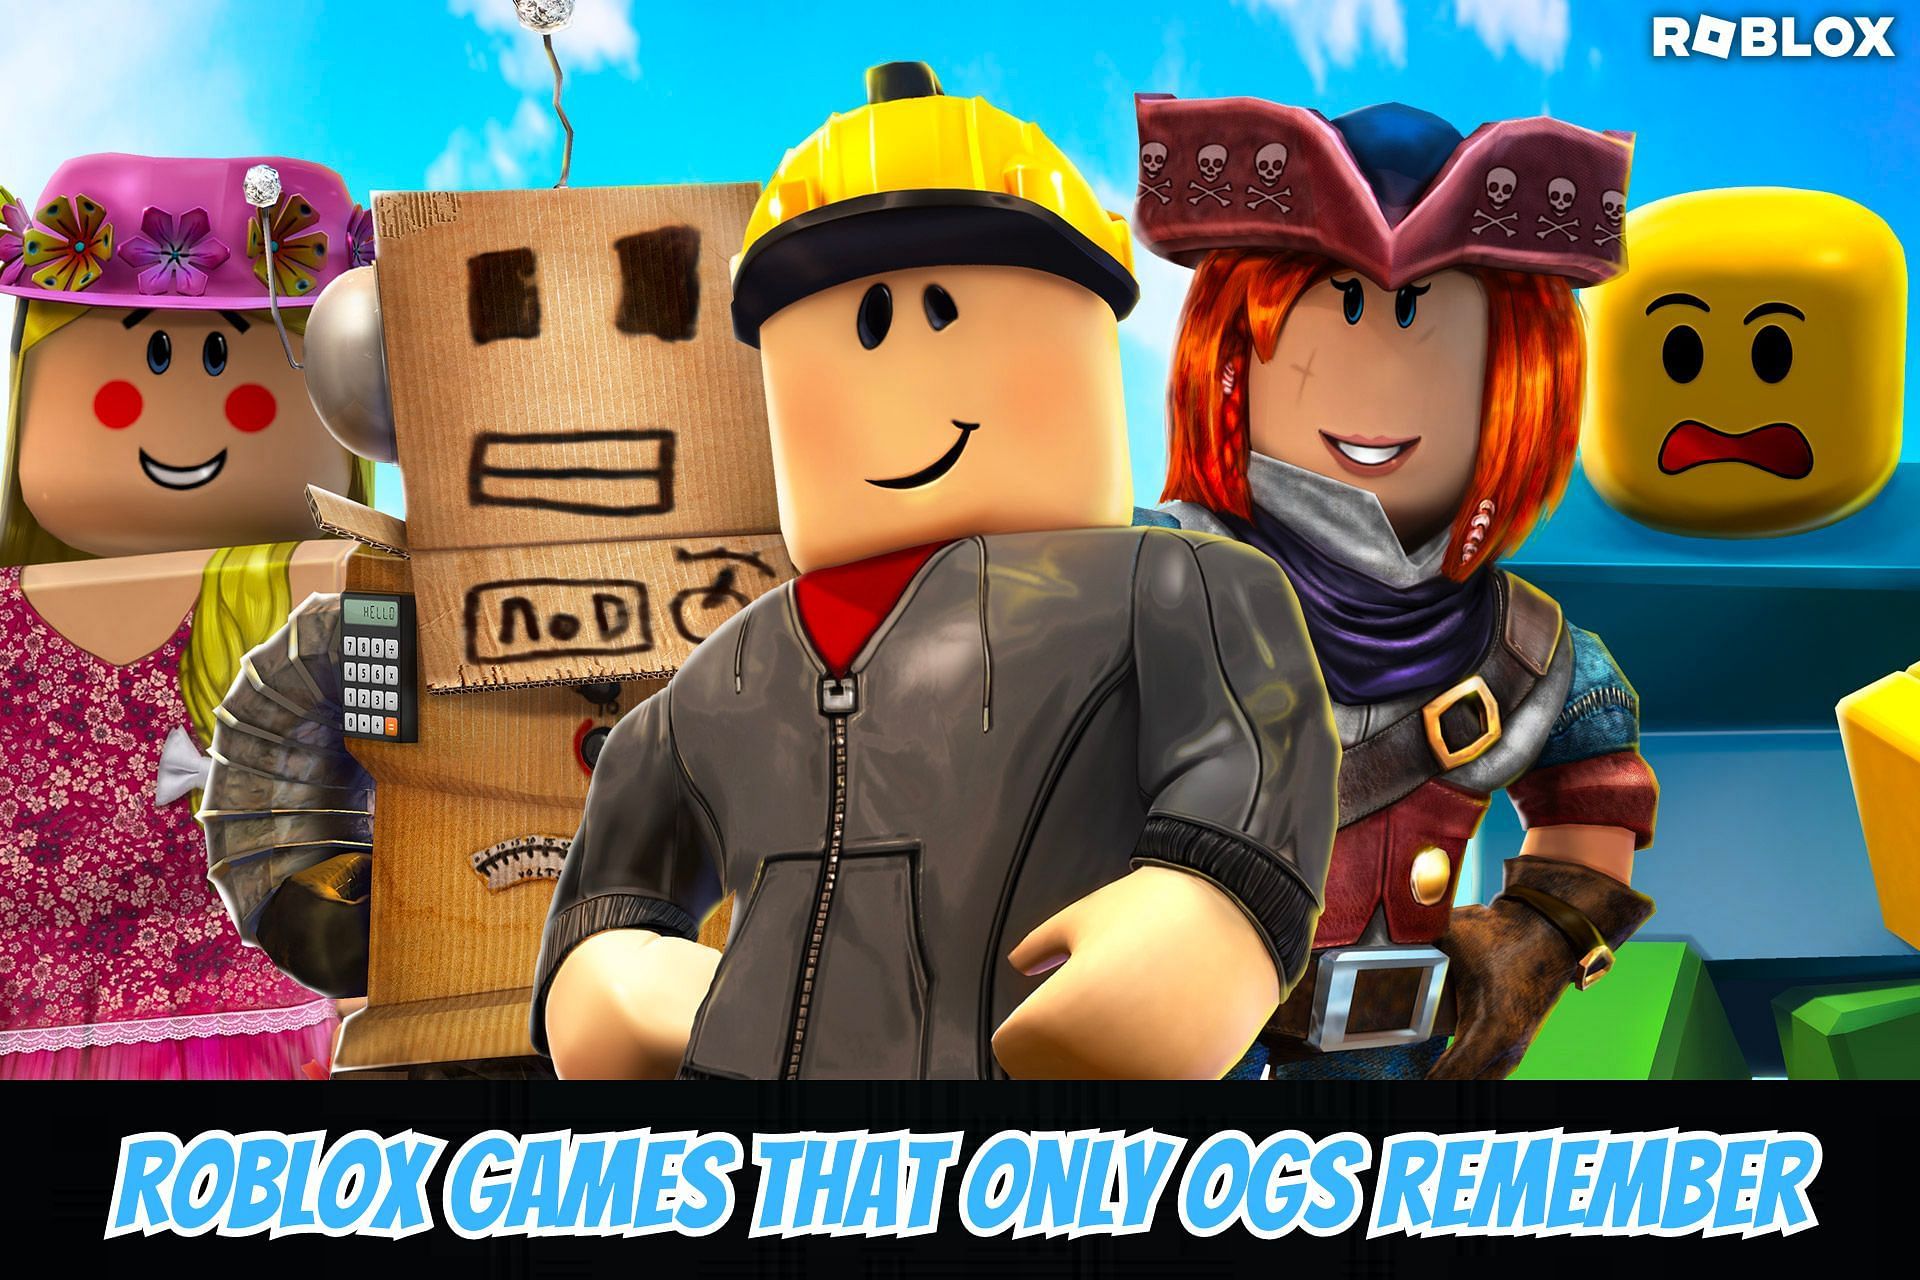 What is 'Forgotten Memories' in 'Roblox'? What to Know and How to Survive